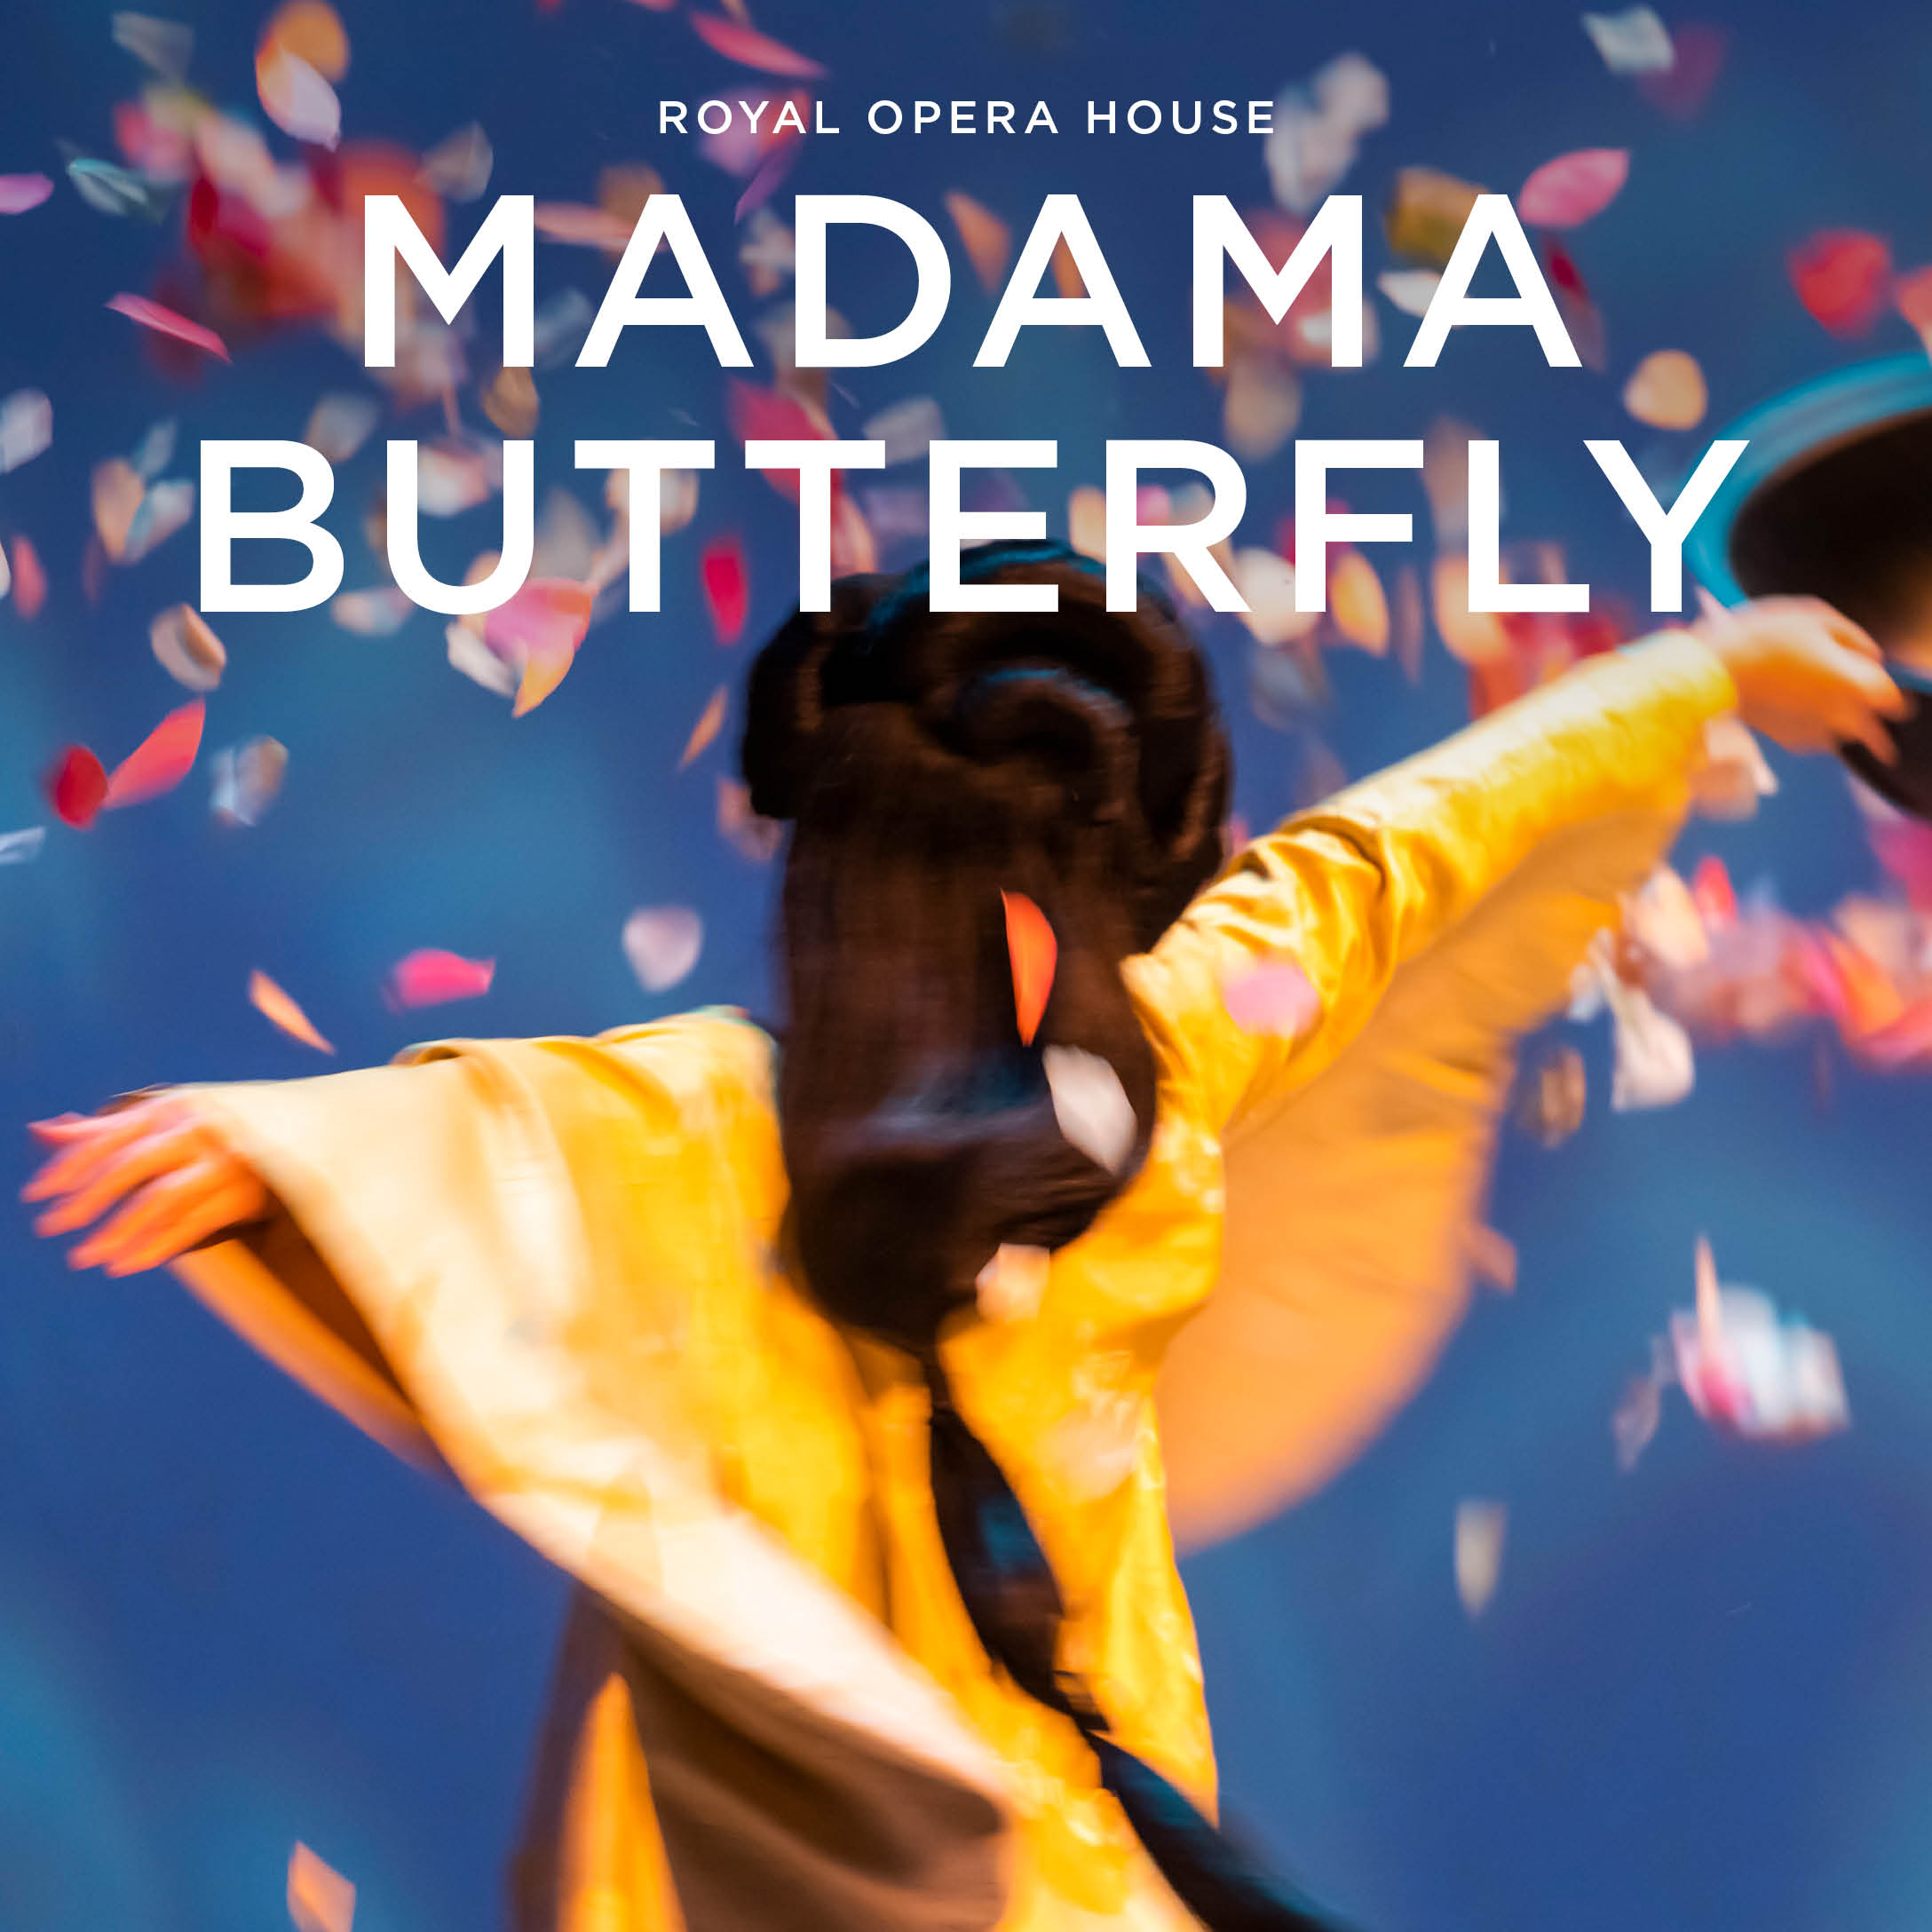 Madama Butterfly photo from the show